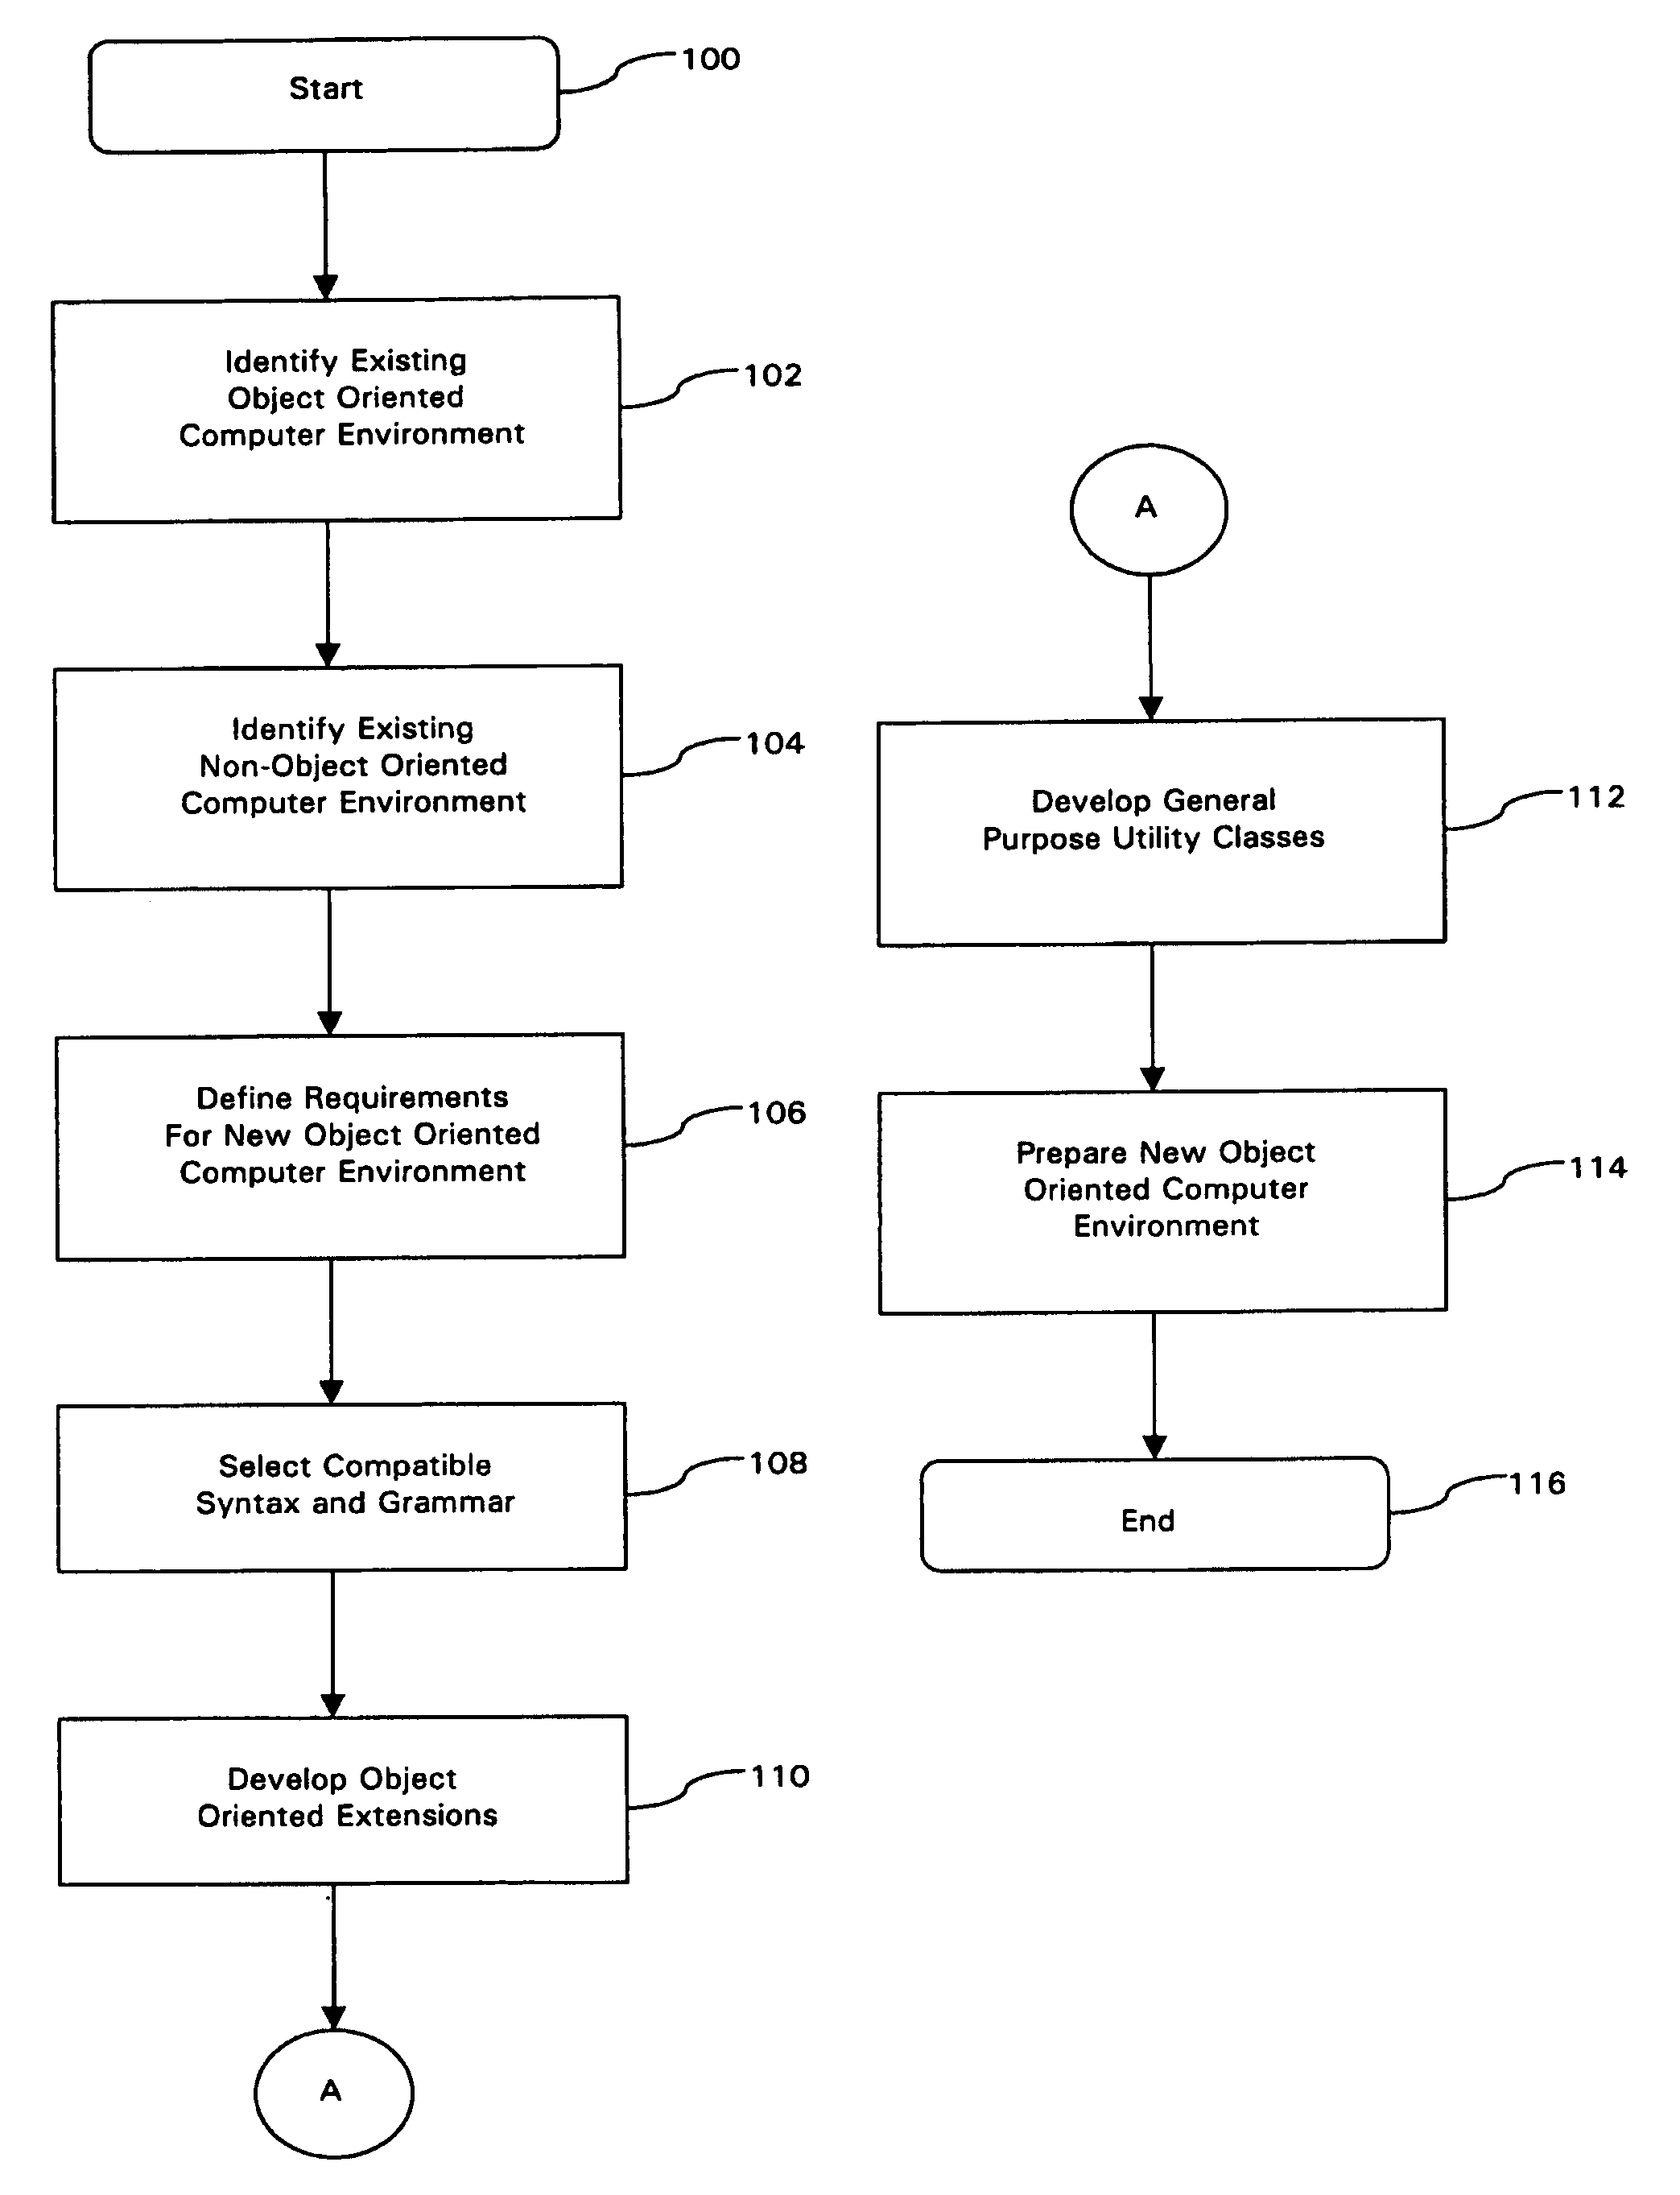 Object oriented ADN and method of converting a non-object oriented computer language to an object oriented computer language